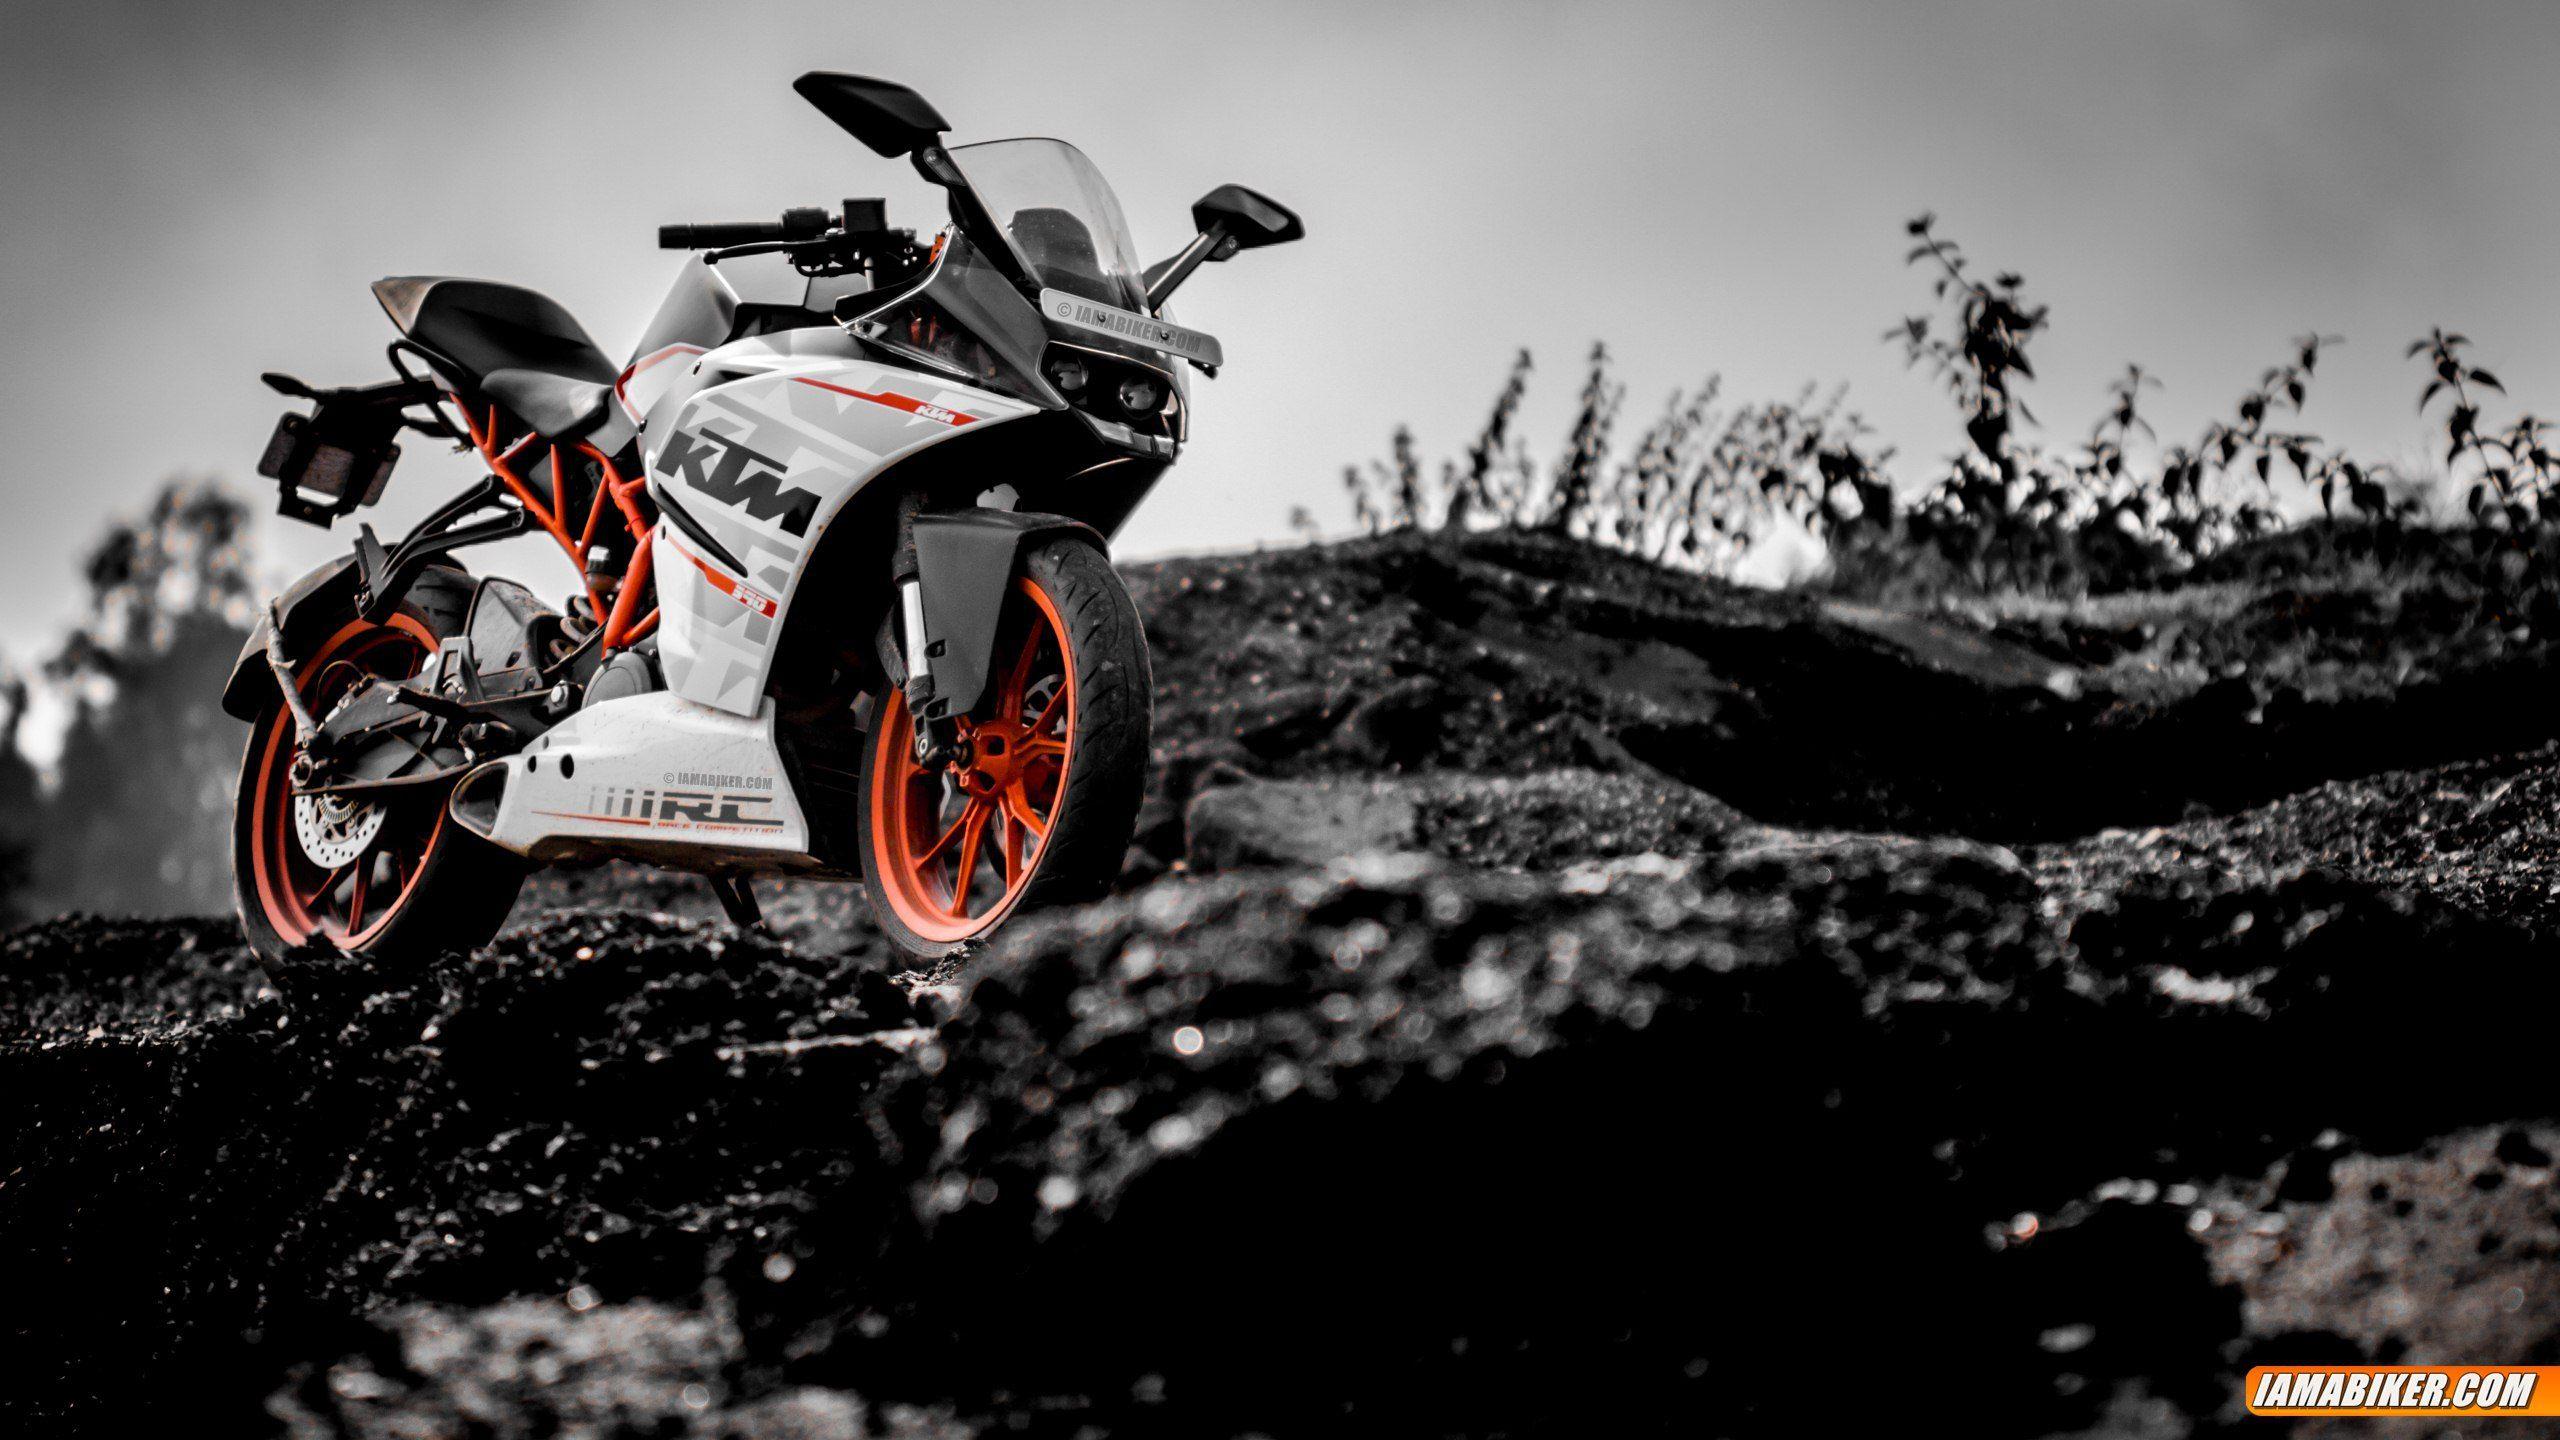 KTM RC 390 wallpaper. Awesomest Vehicles In The WORLD!. Ktm rc